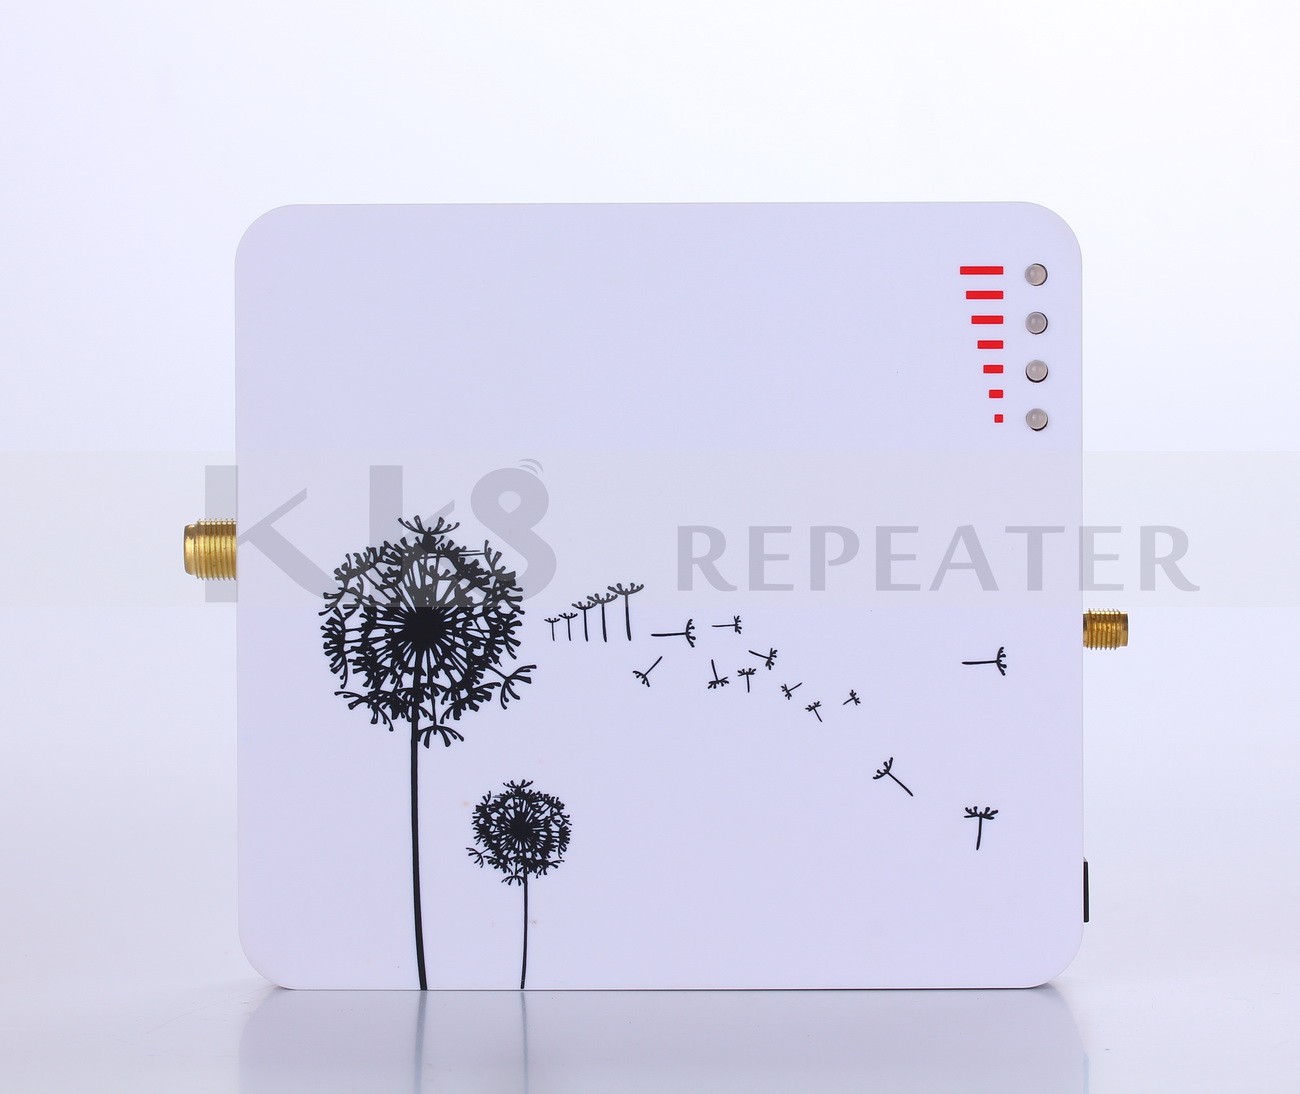 Single-Band GSM Pico Repeater